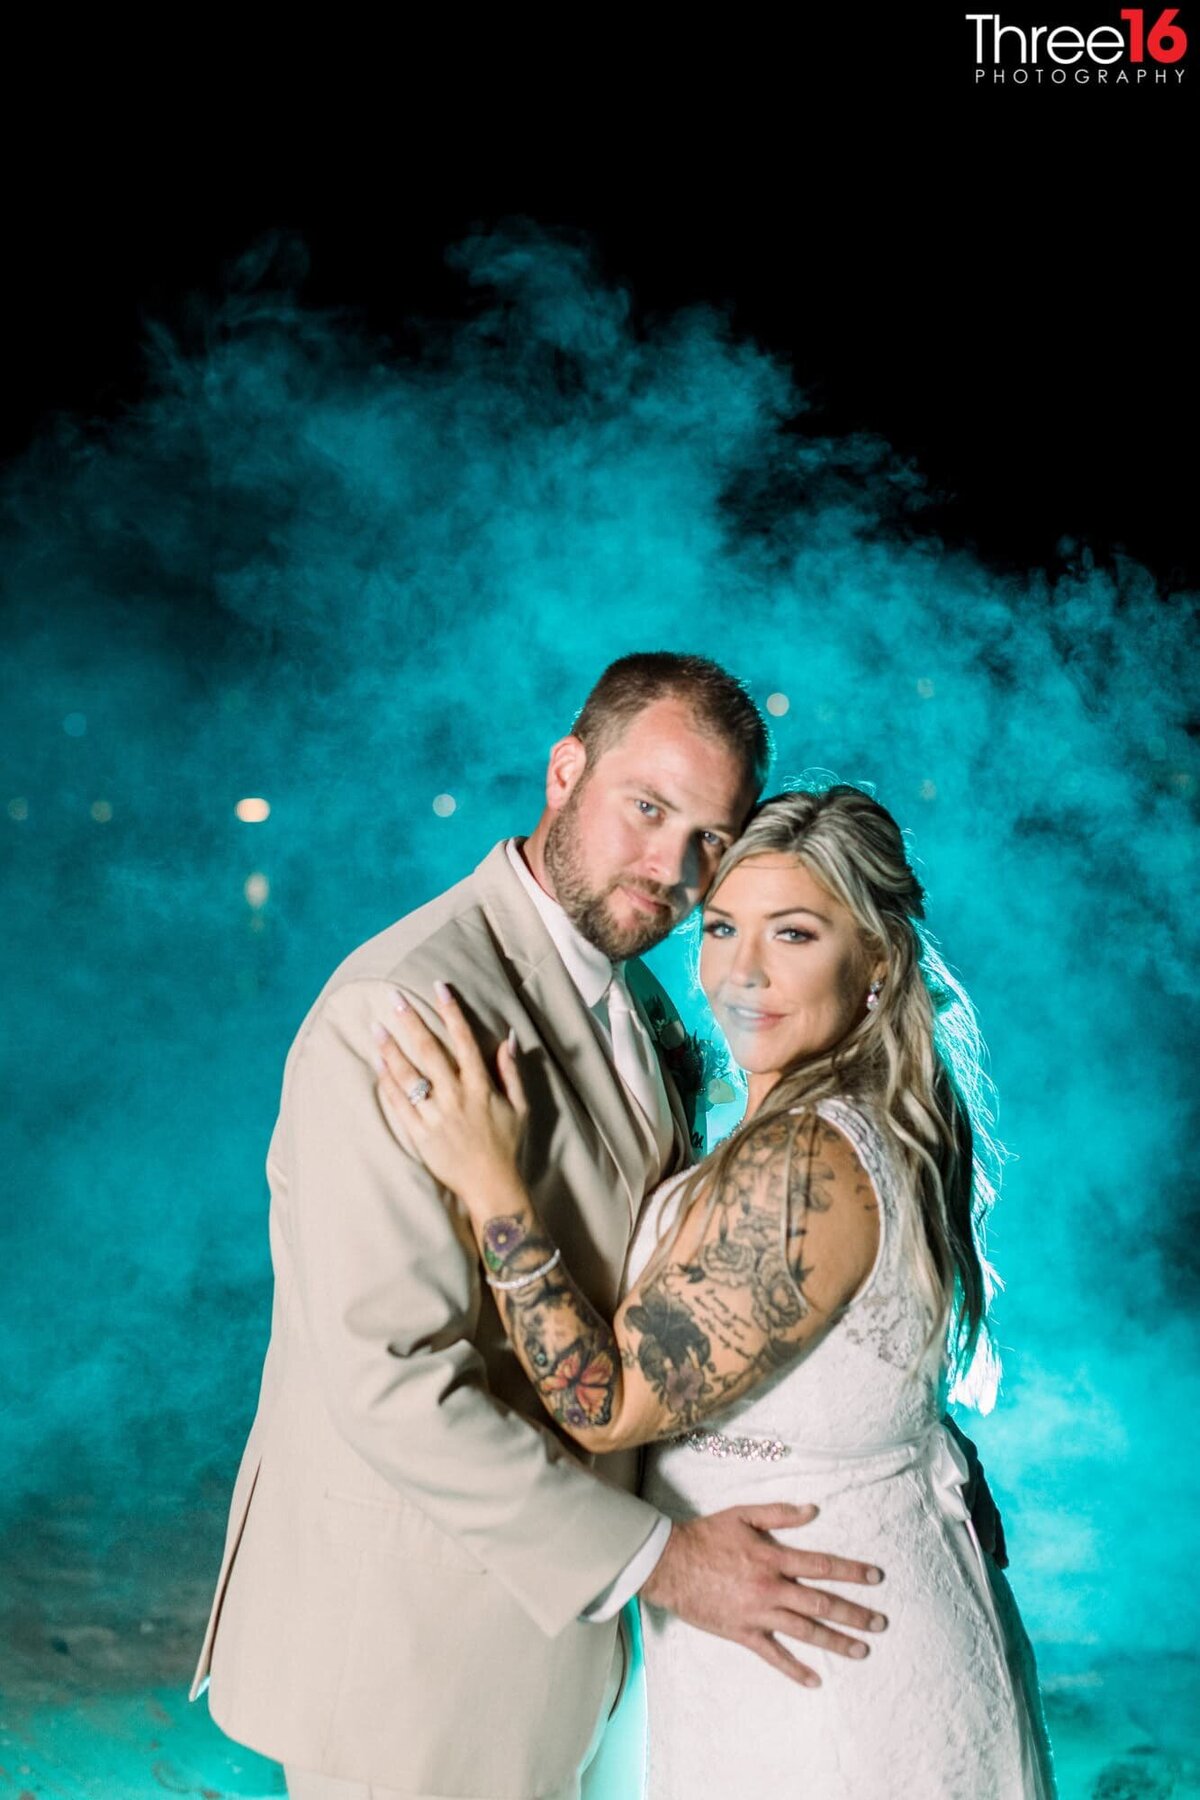 Bride and Groom cozy up to each other as they pose for photos in front of a blue mist